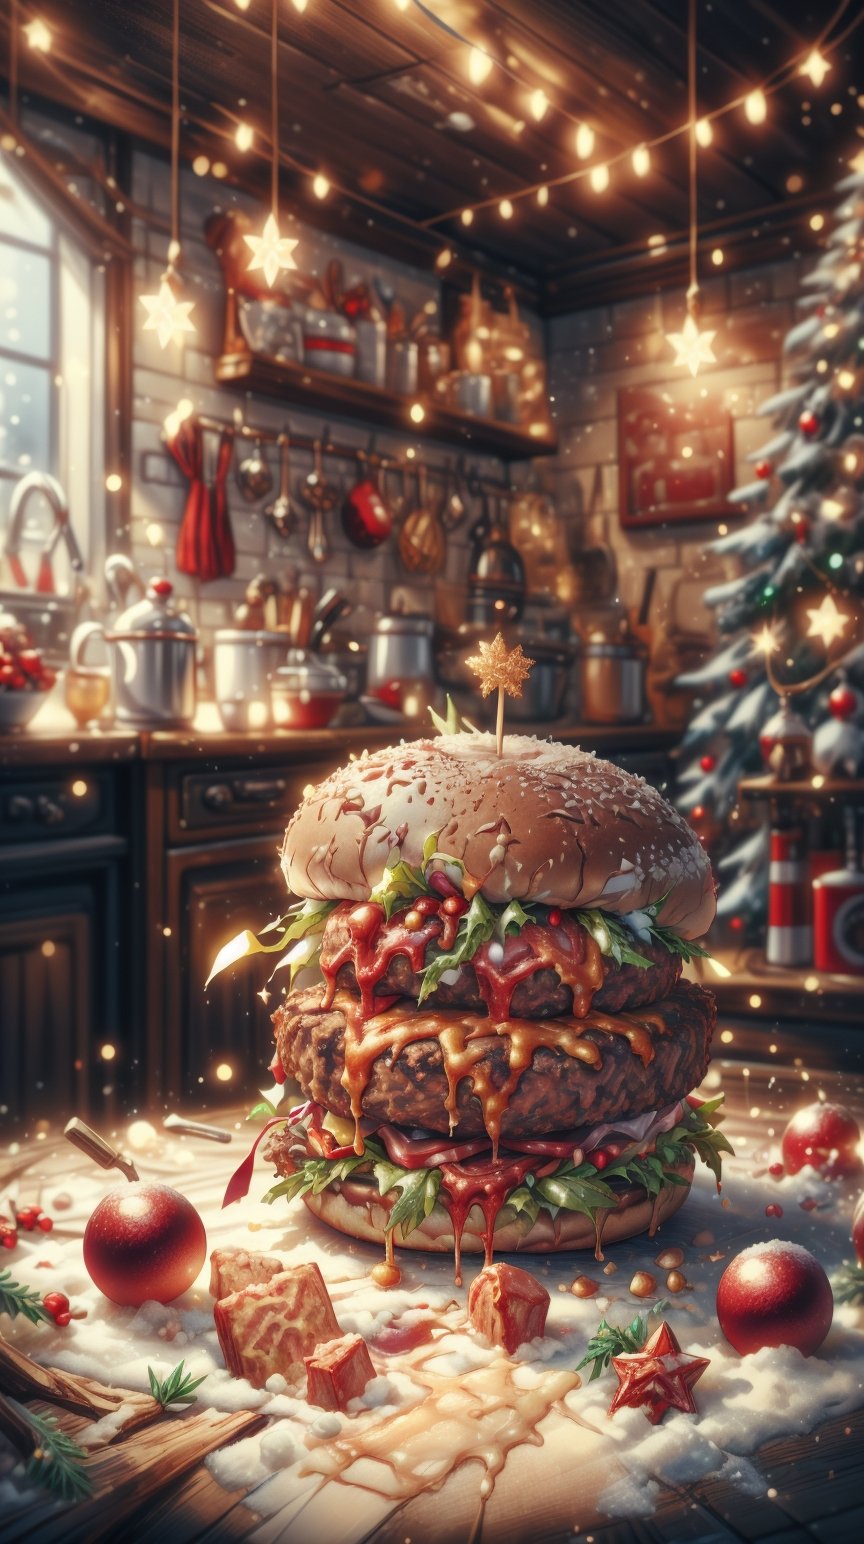  ChristmasWintery a juicy cheeseburger served in a nostalgic 1950s diner, (Masterpiece:1.3) (best quality:1.2) (high quality:1.1)